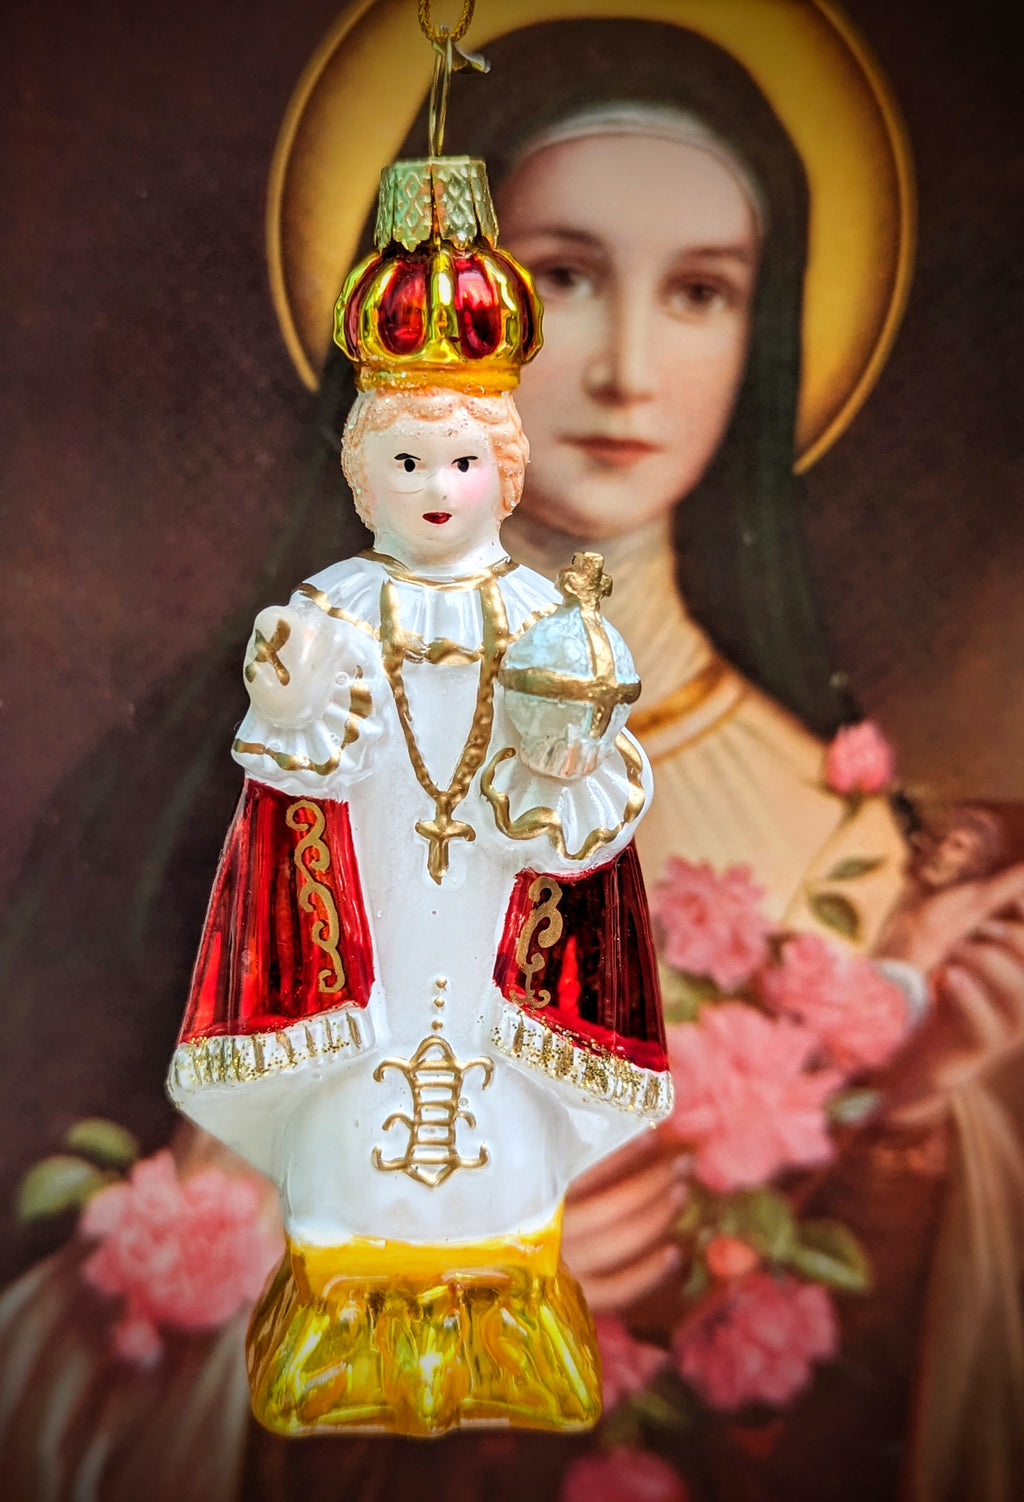 Have we had enough religious kitsch yet people????

Thought not.....cutest Child of Prague glass, glittered and painted decorations are a gorgeous addition to your Christmas tree or festive holiday display.

Hand finished glass decoration 

Size 12 x 5 x 3cm

Fragile, handle with care

Cody Foster 